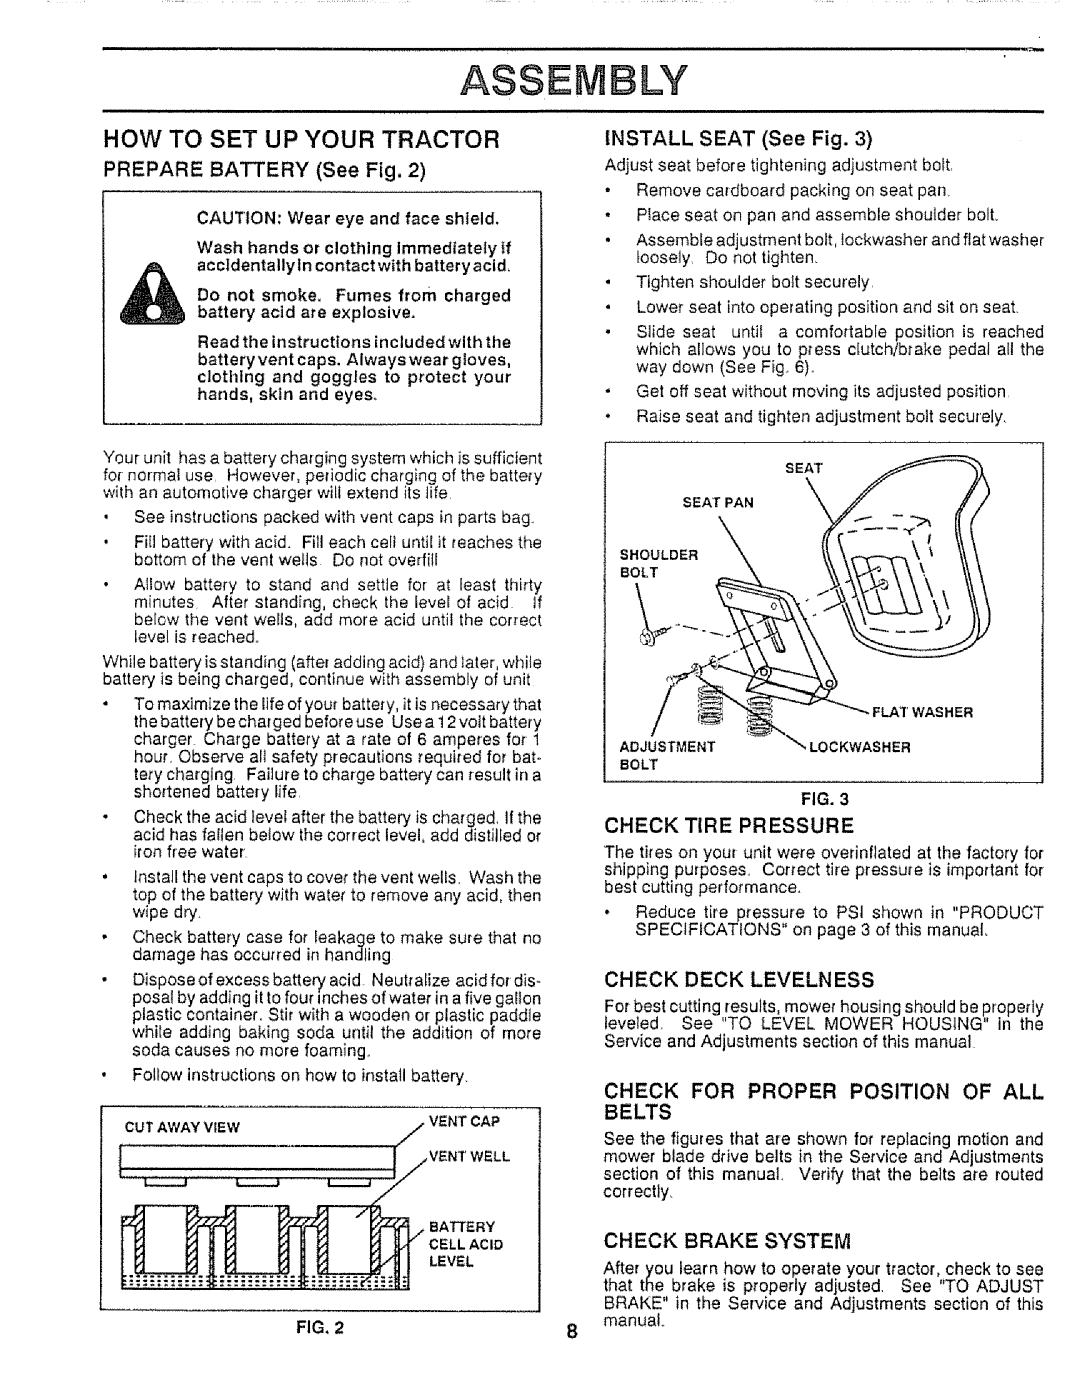 Craftsman 917.25552 As E, How To Set Up Your Tractor, PREPARE BATTERY See Fig, INSTALL SEAT See Fig, Check Tire Pressure 